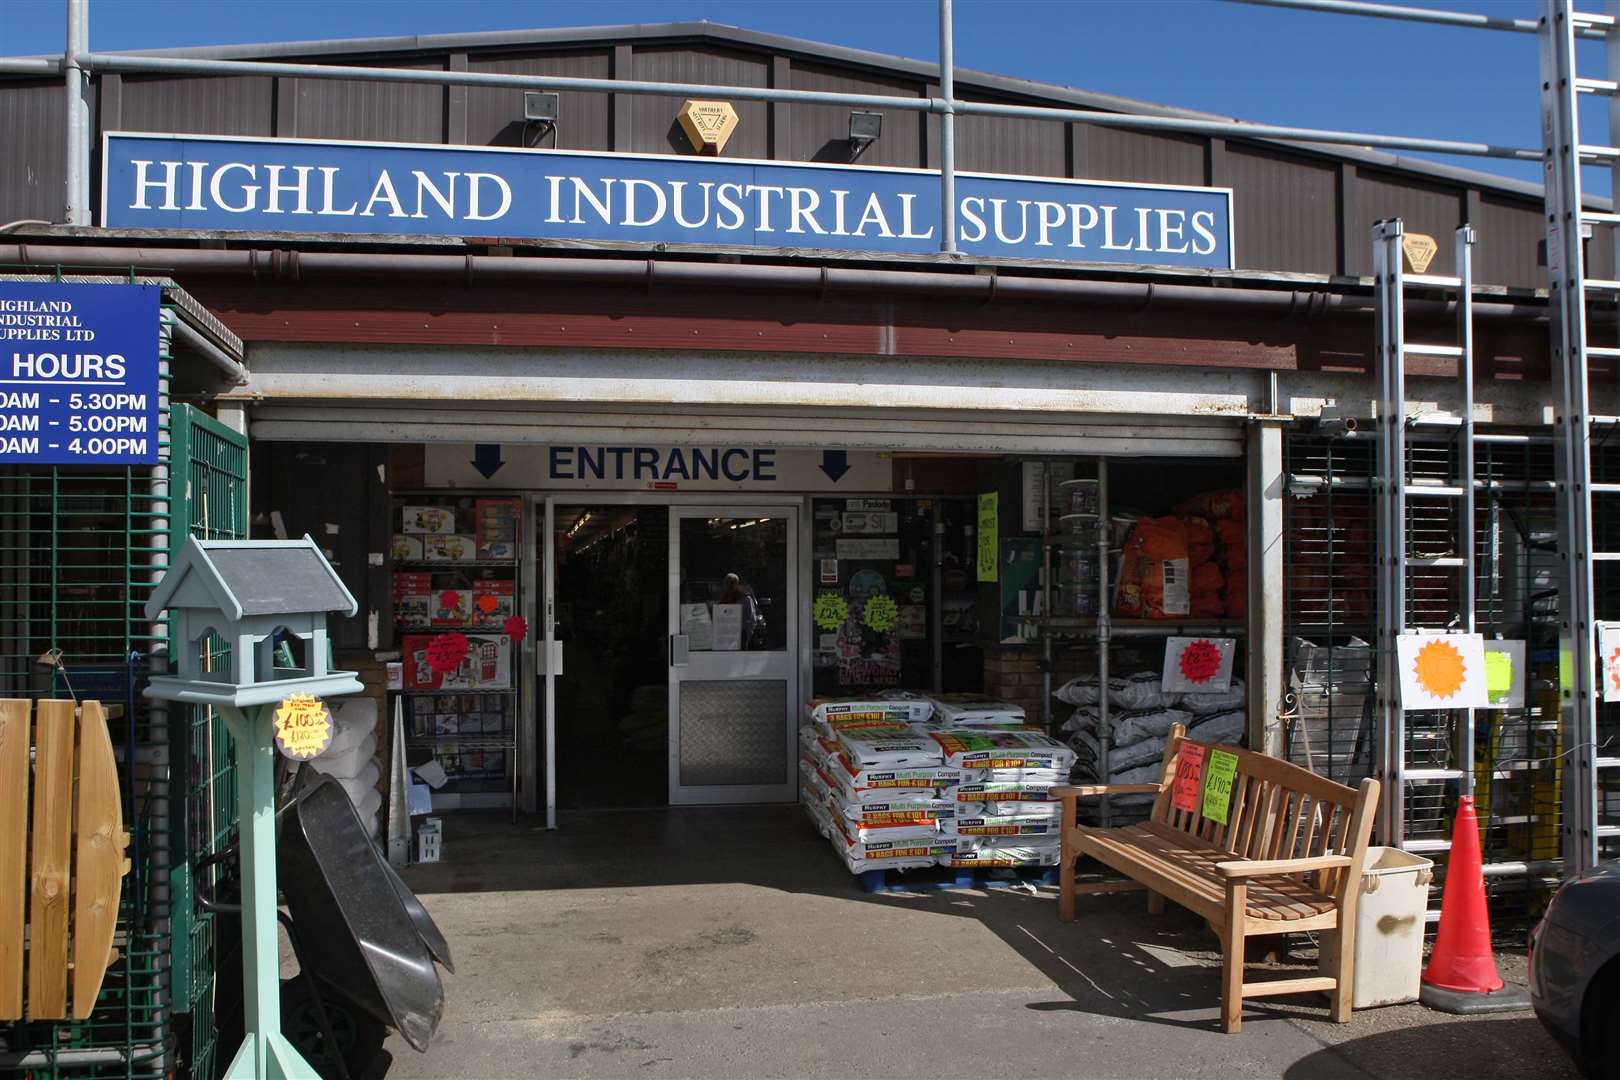 Highland Industrial Supplies in Inverness. Picture: Andrew Smith.